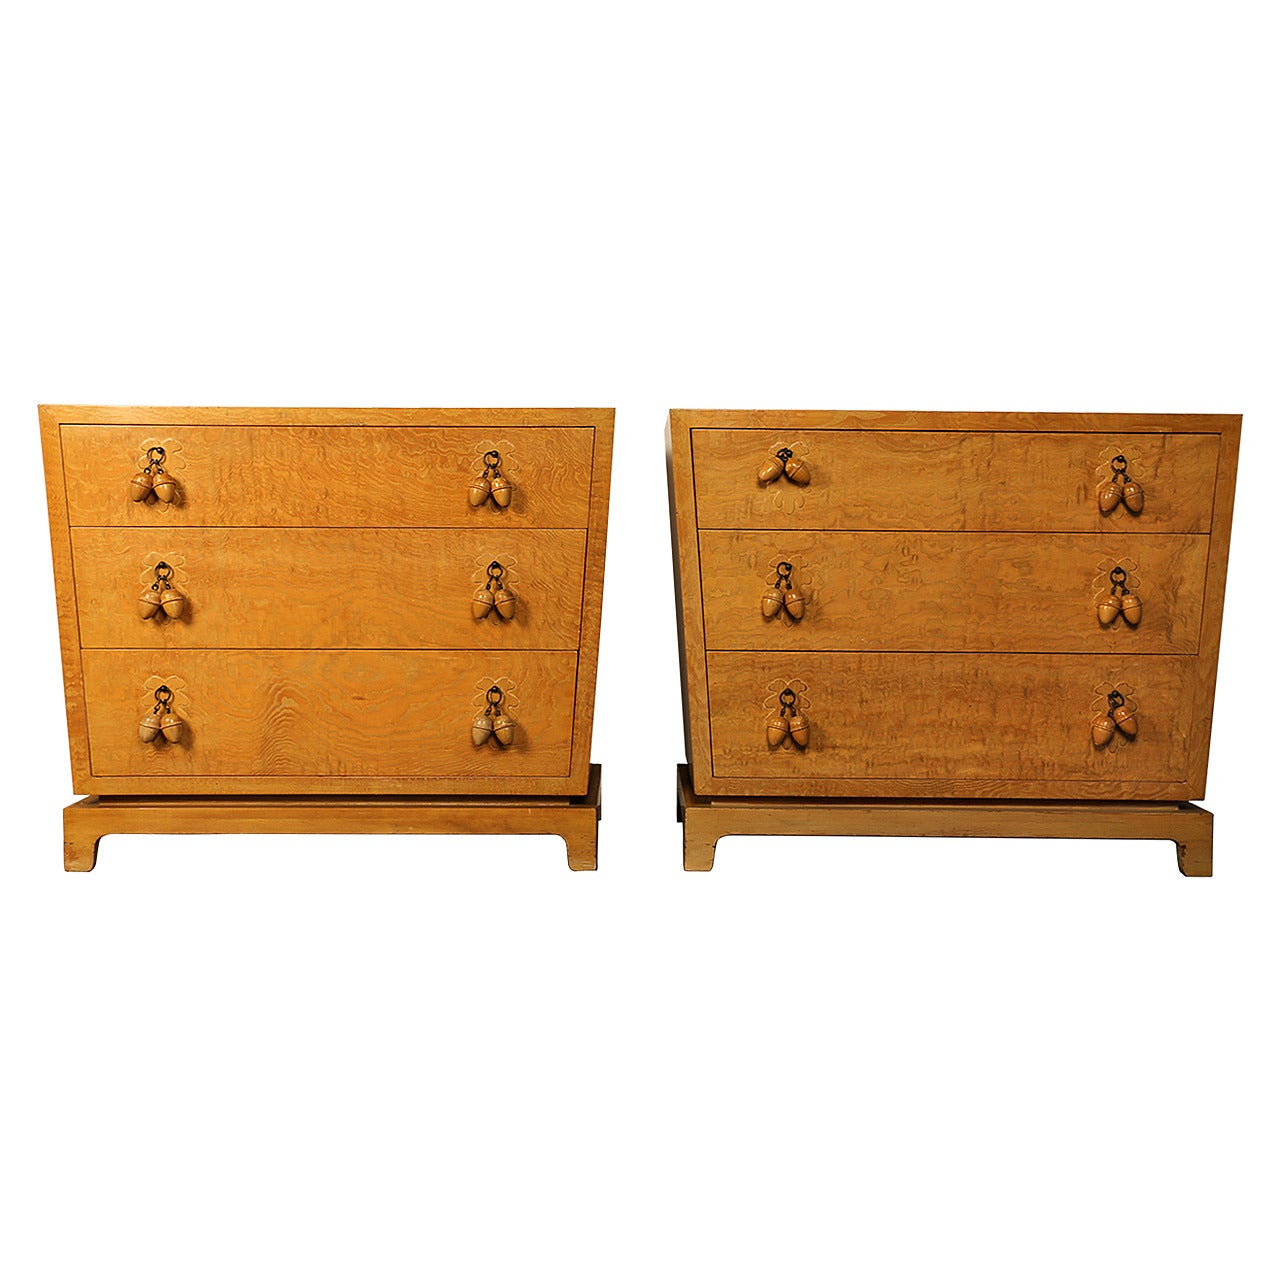 Pair of "Acorn" Chests by Johan Tapp